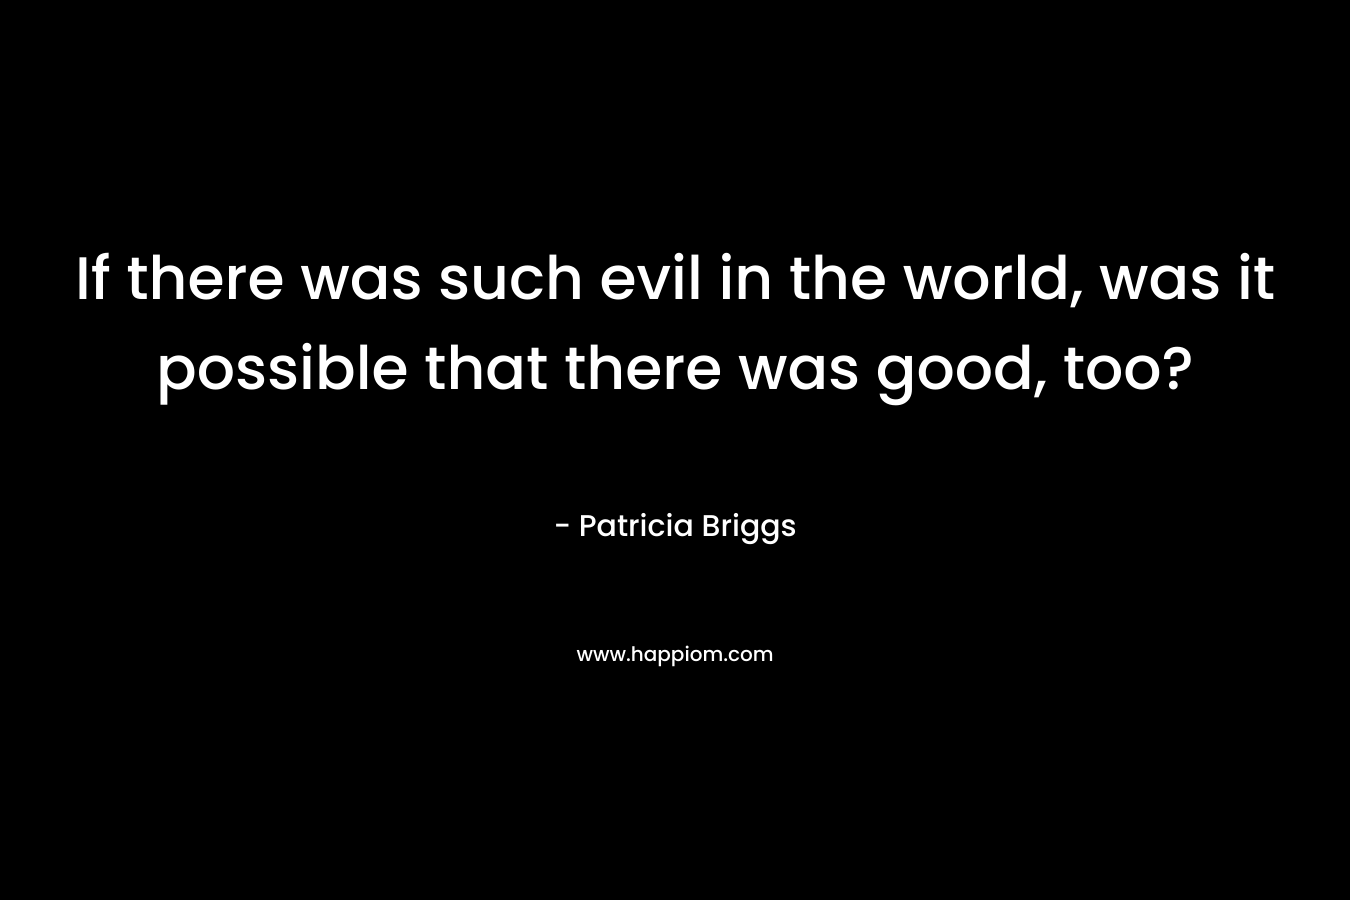 If there was such evil in the world, was it possible that there was good, too?